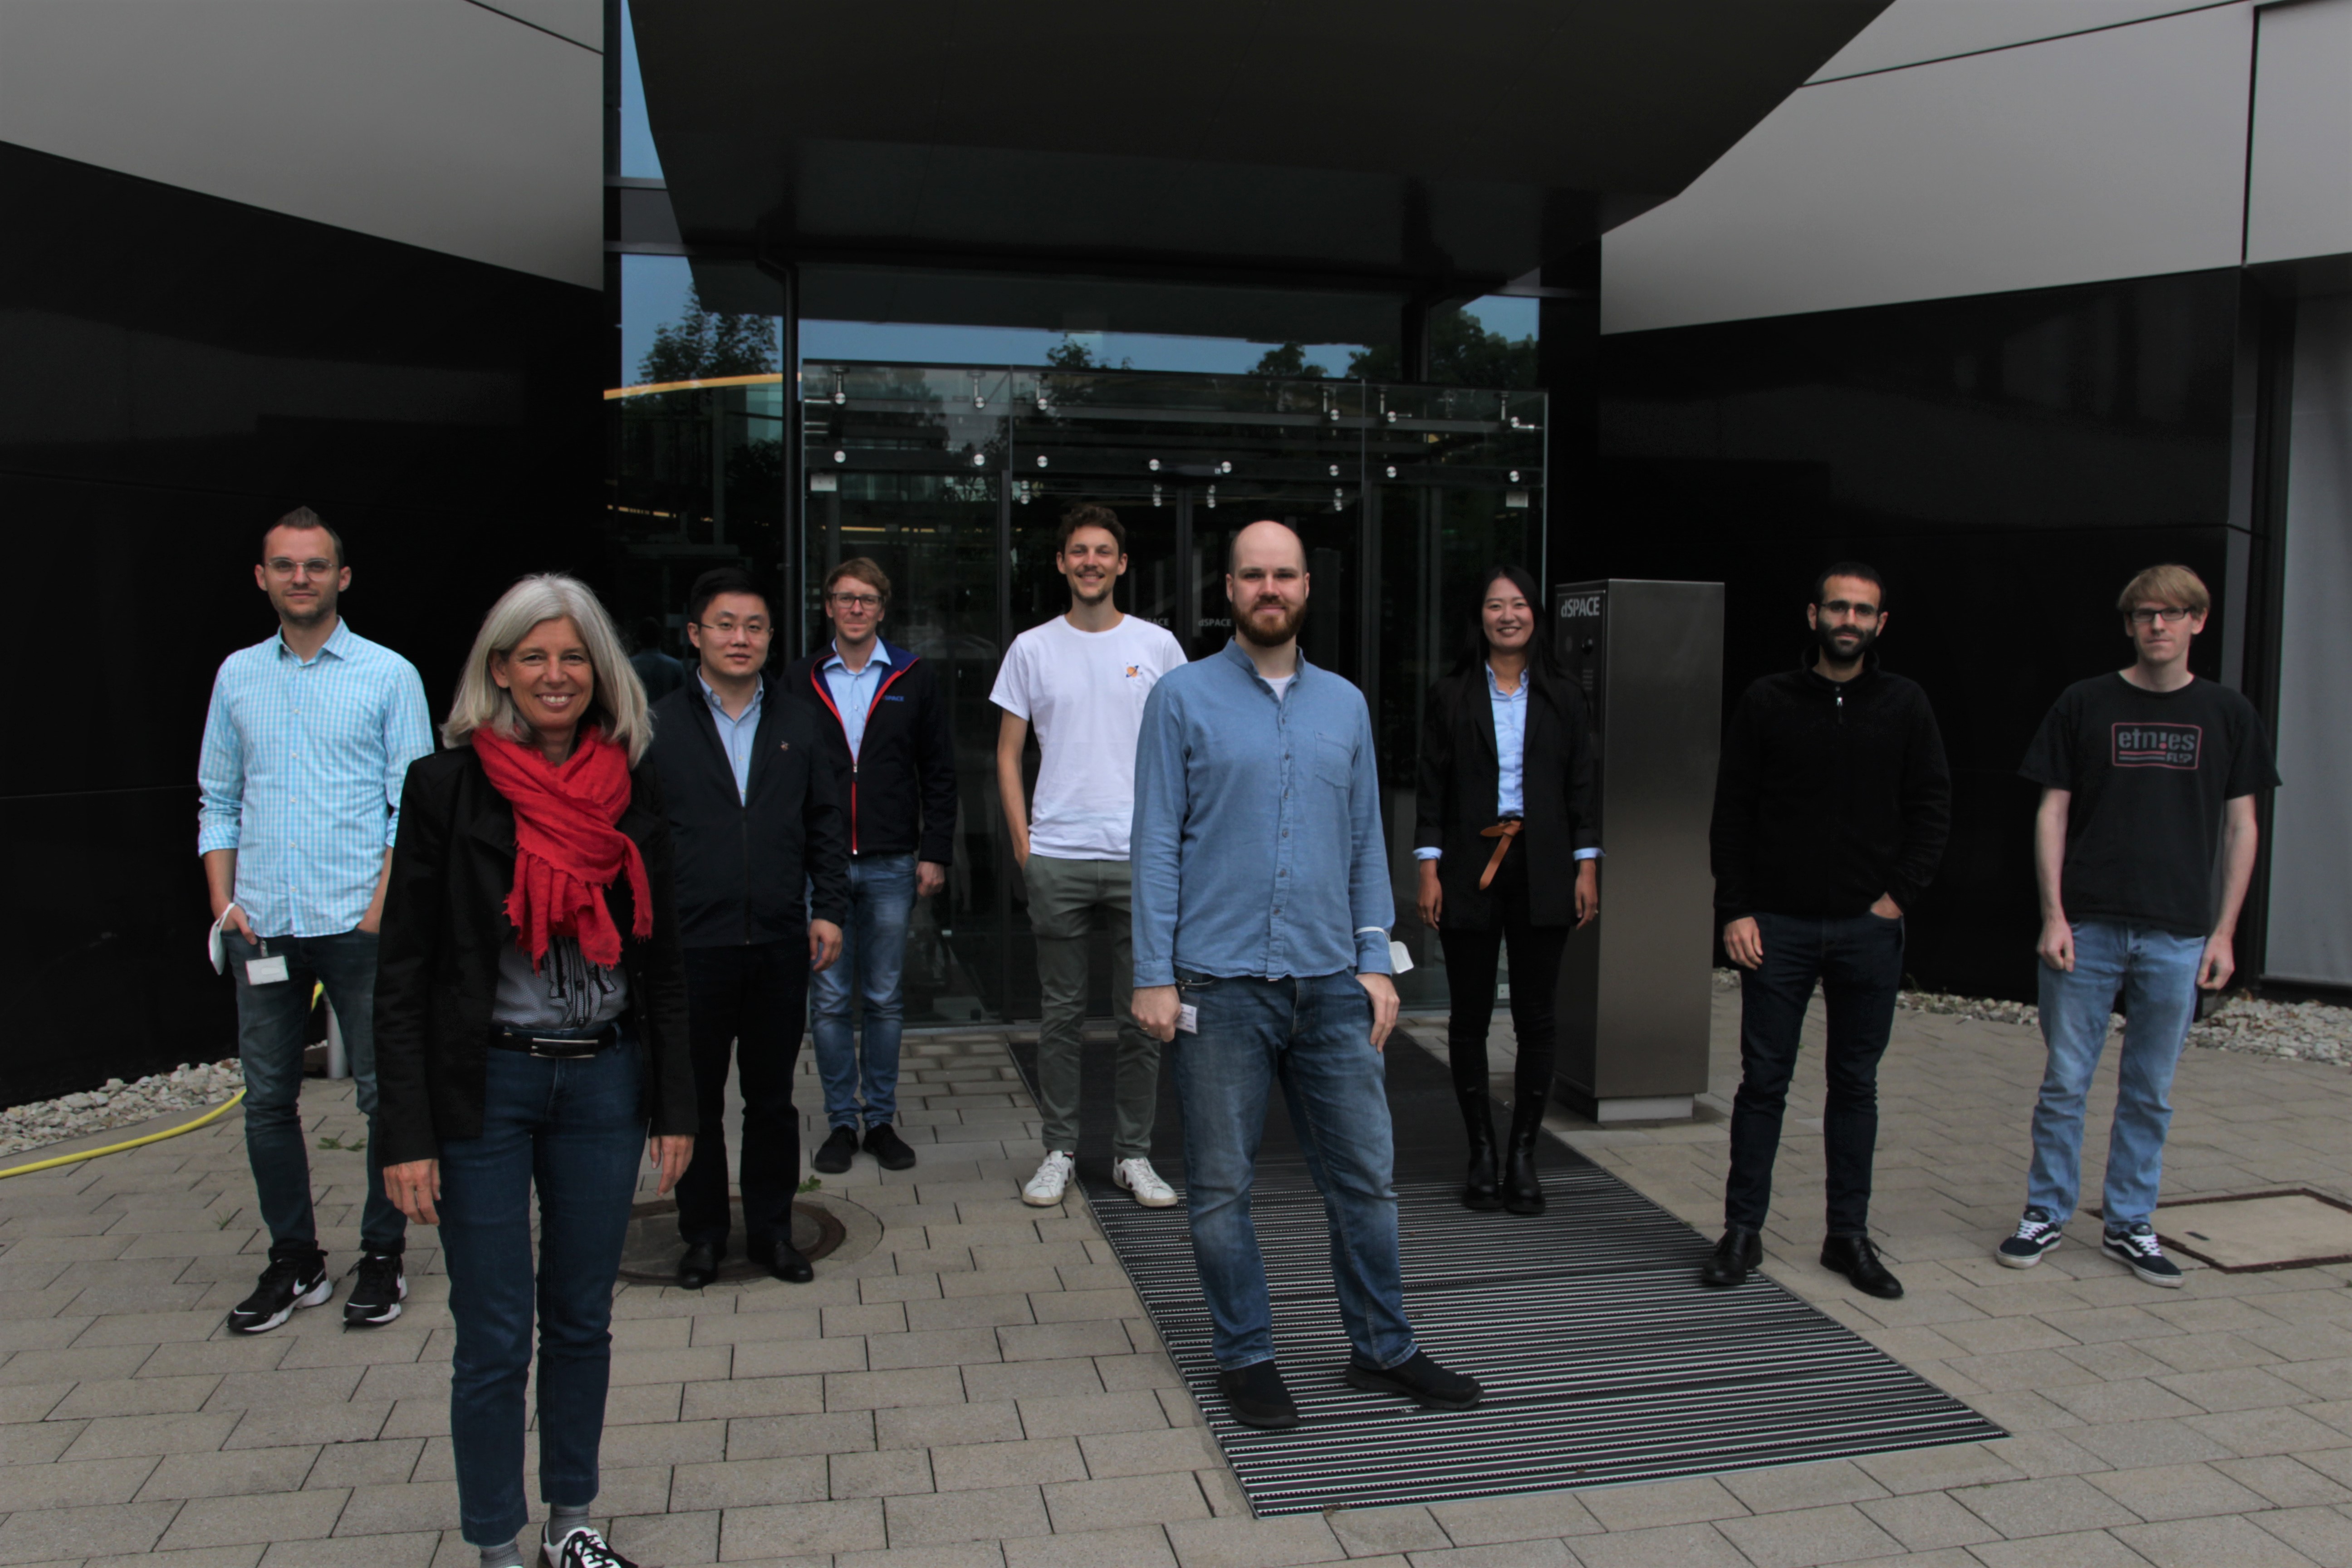 project partners during the meeting at dSPACE in Paderborn